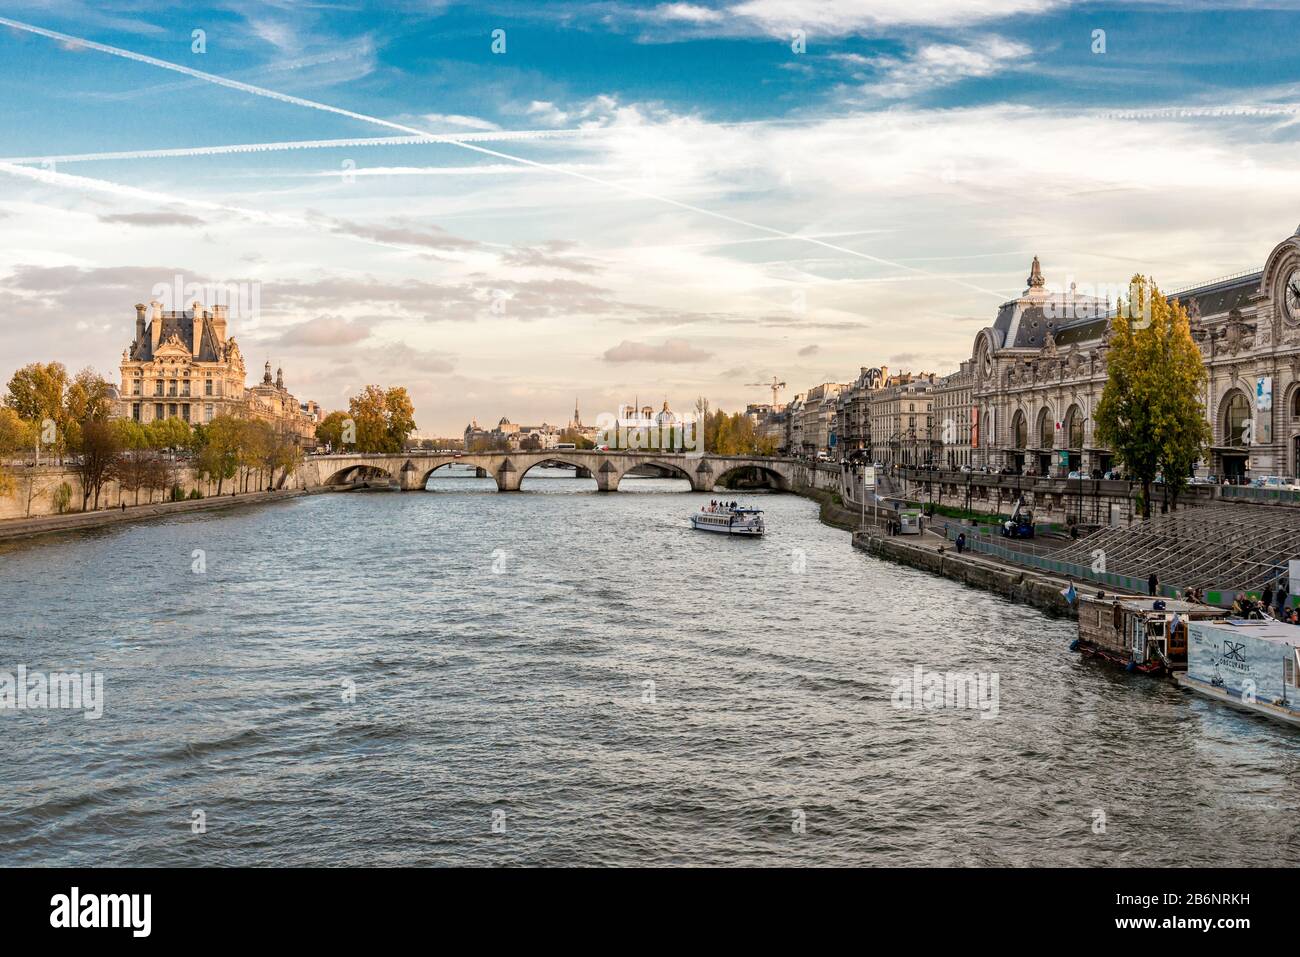 Seine river view from a pedestrian bridge near the Musee d’Orsay museum, Paris, France Stock Photo